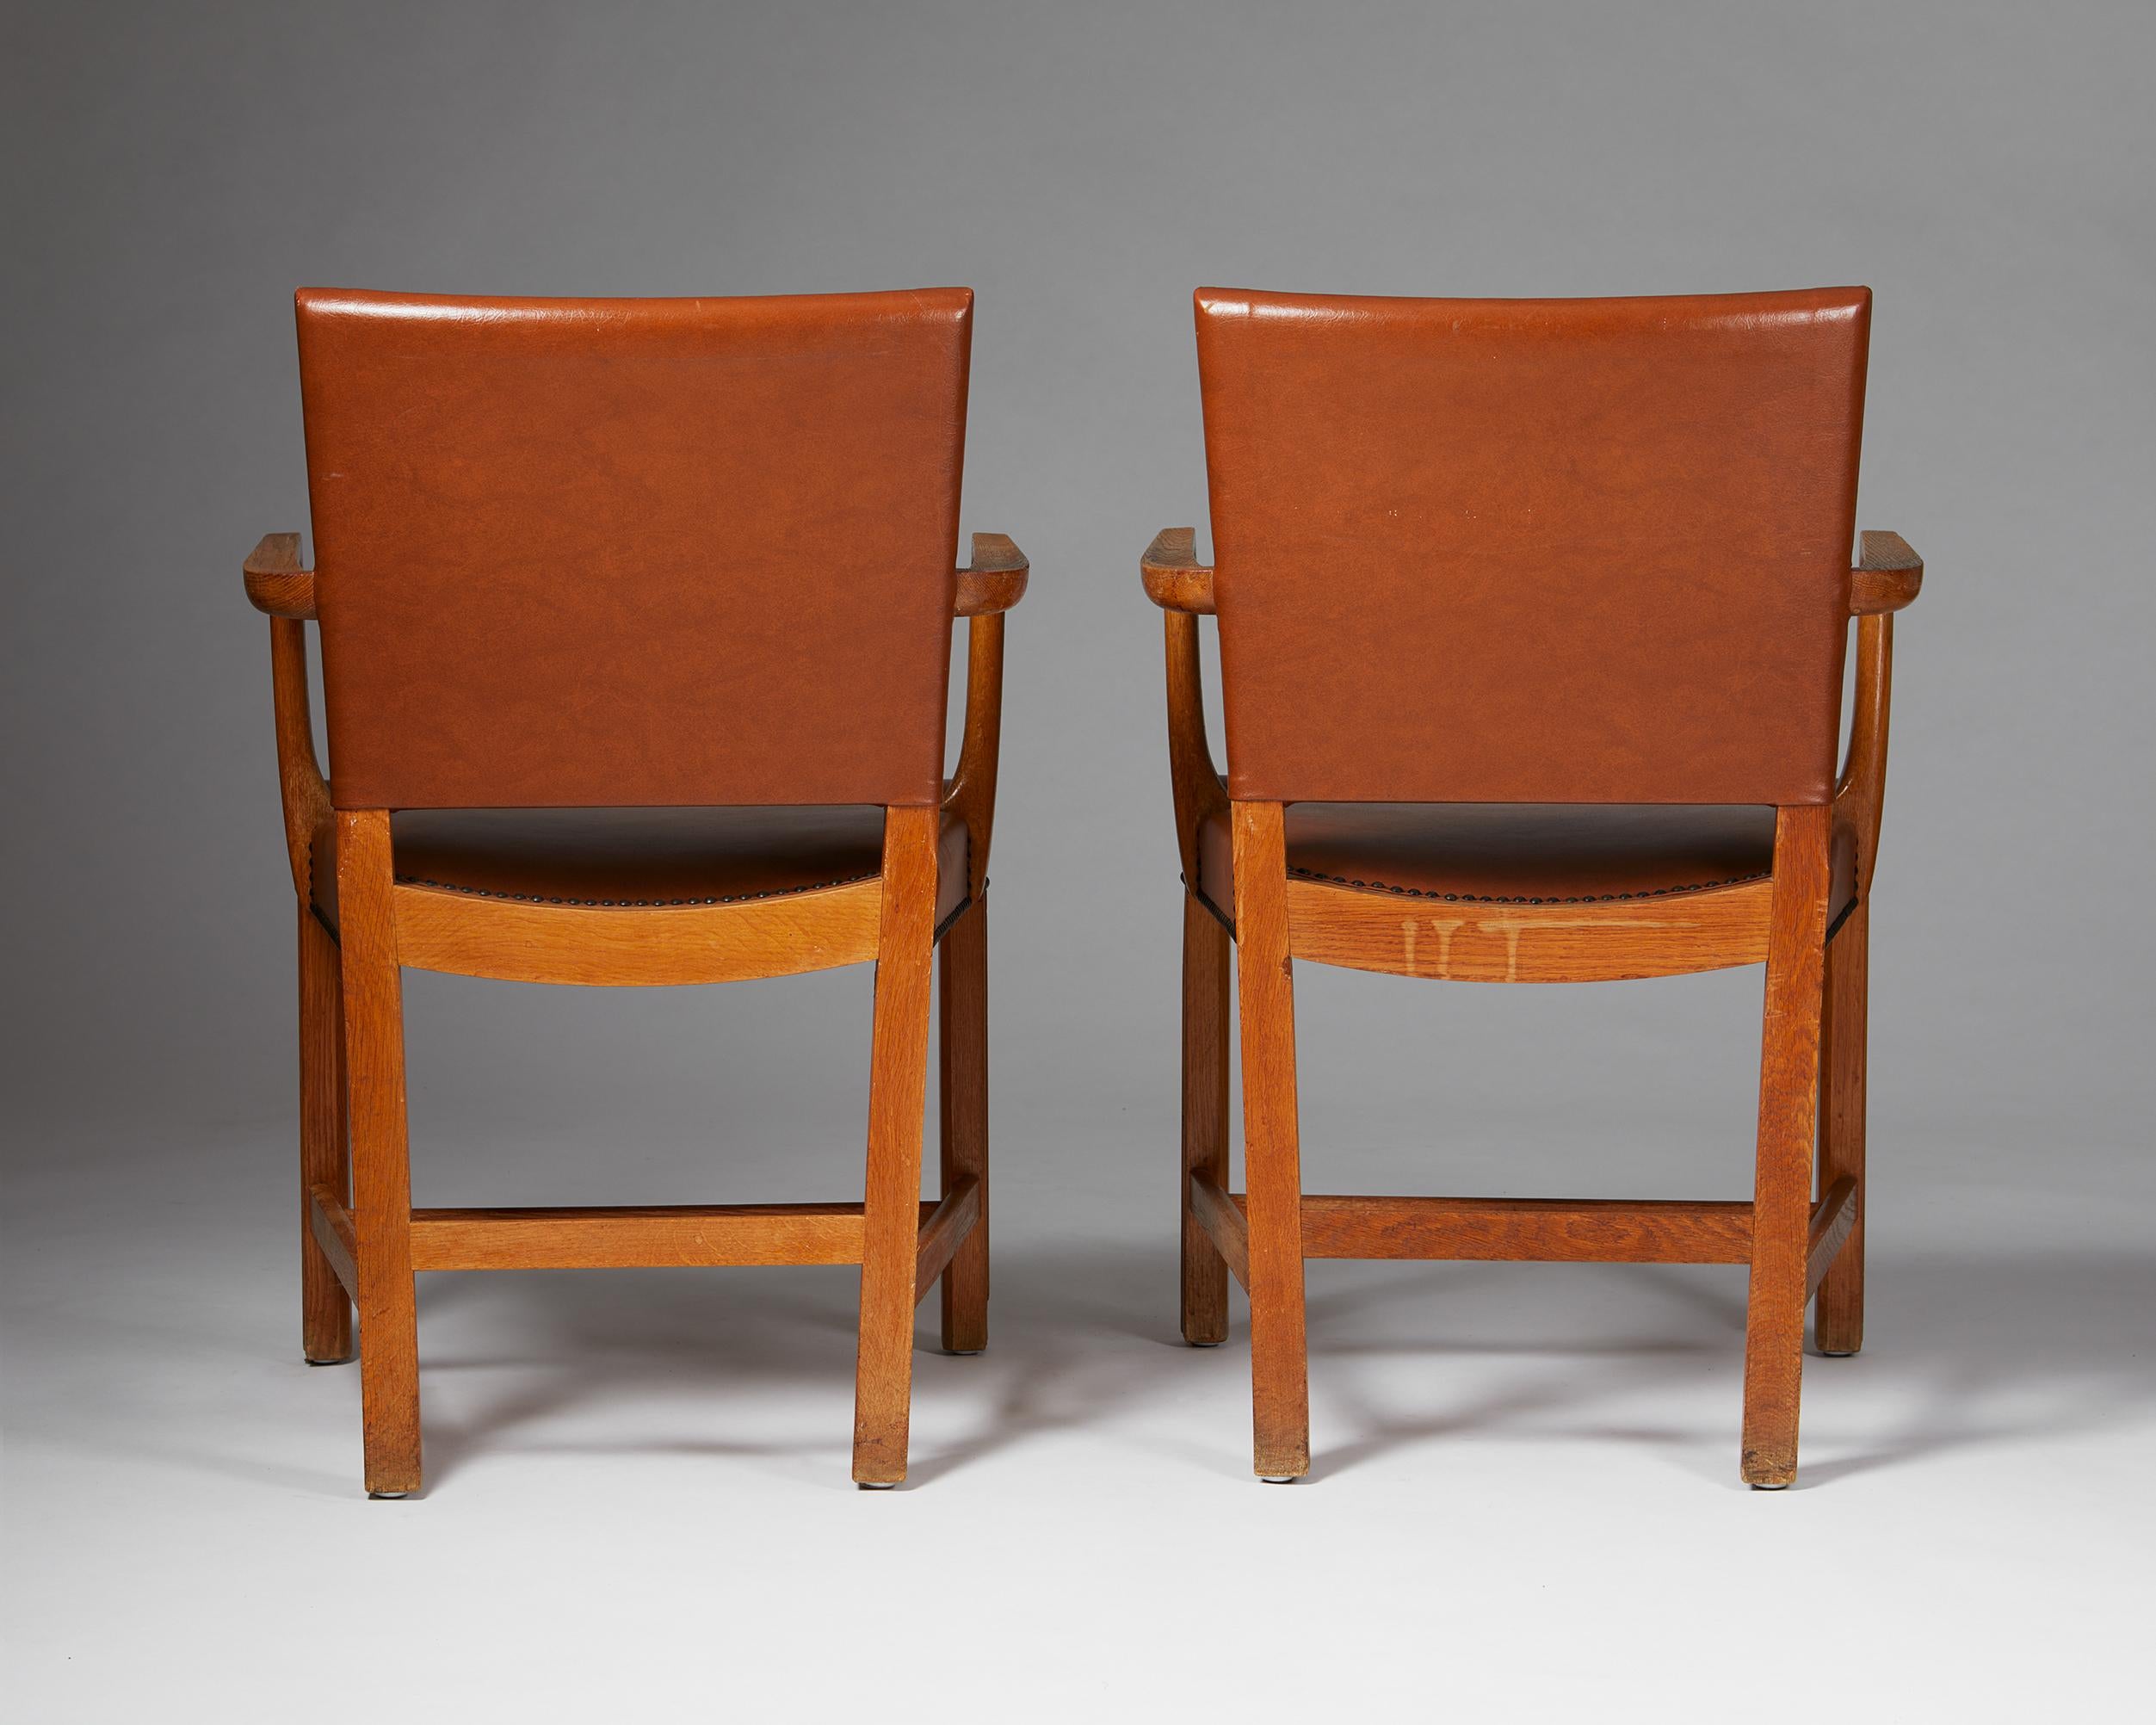 Pair of Armchairs “The Red Chair” Designed by Kaare Klint for Rud. Rasmussen For Sale 1